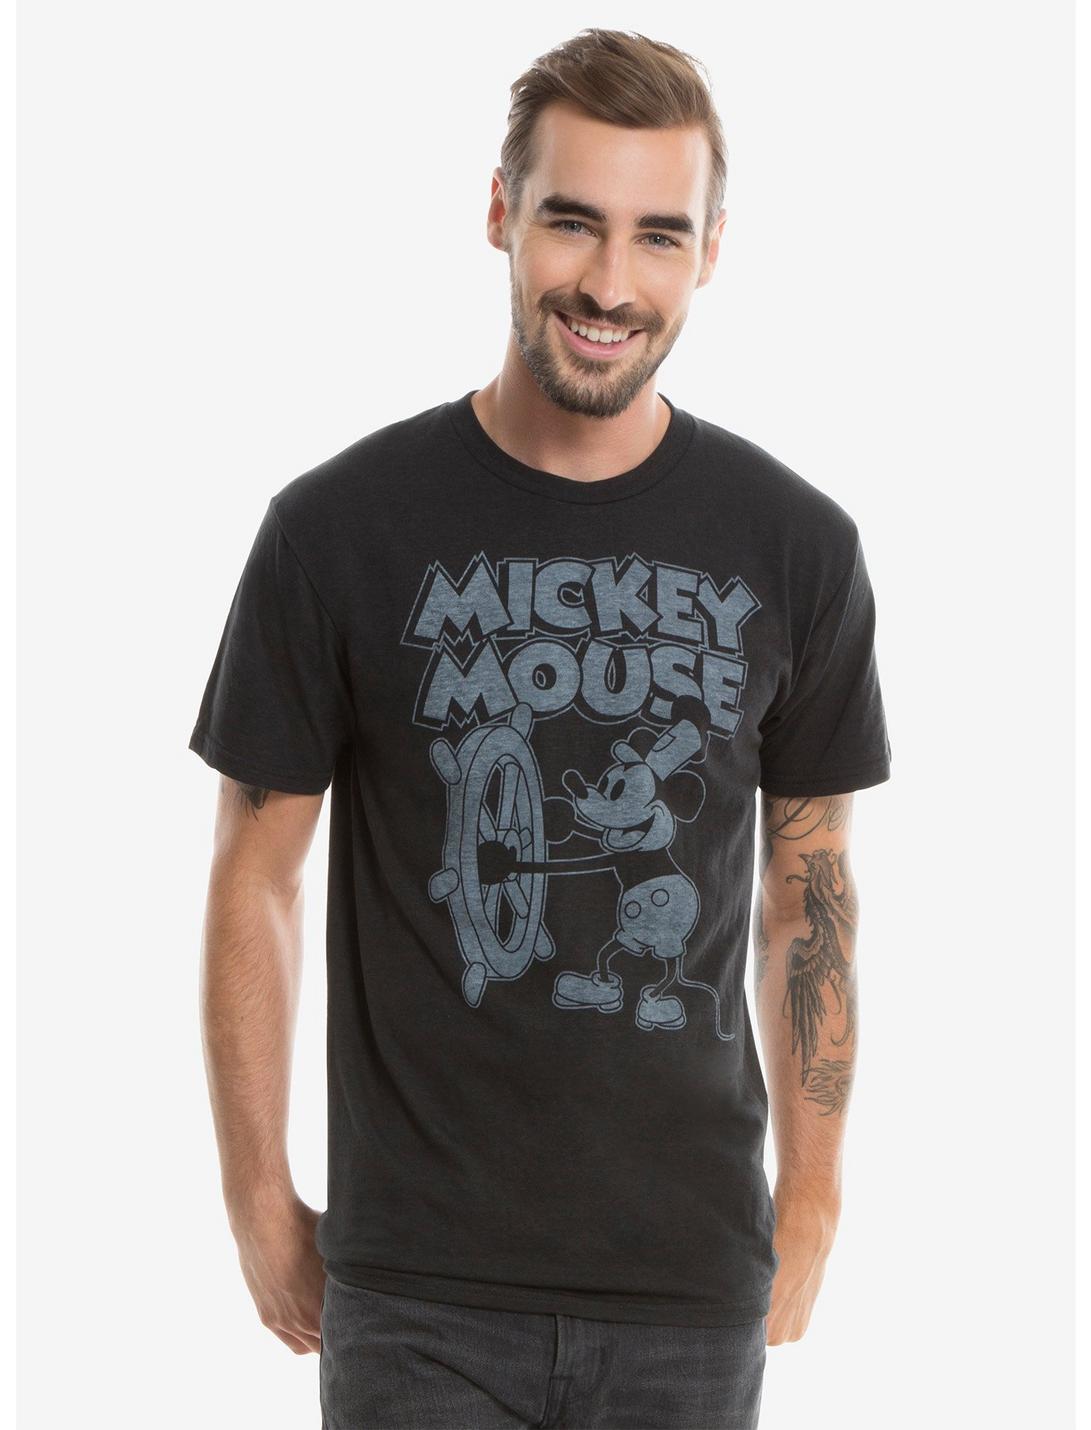 Disney Mickey Mouse Steamboat Willie T-Shirt, BLACK, hi-res